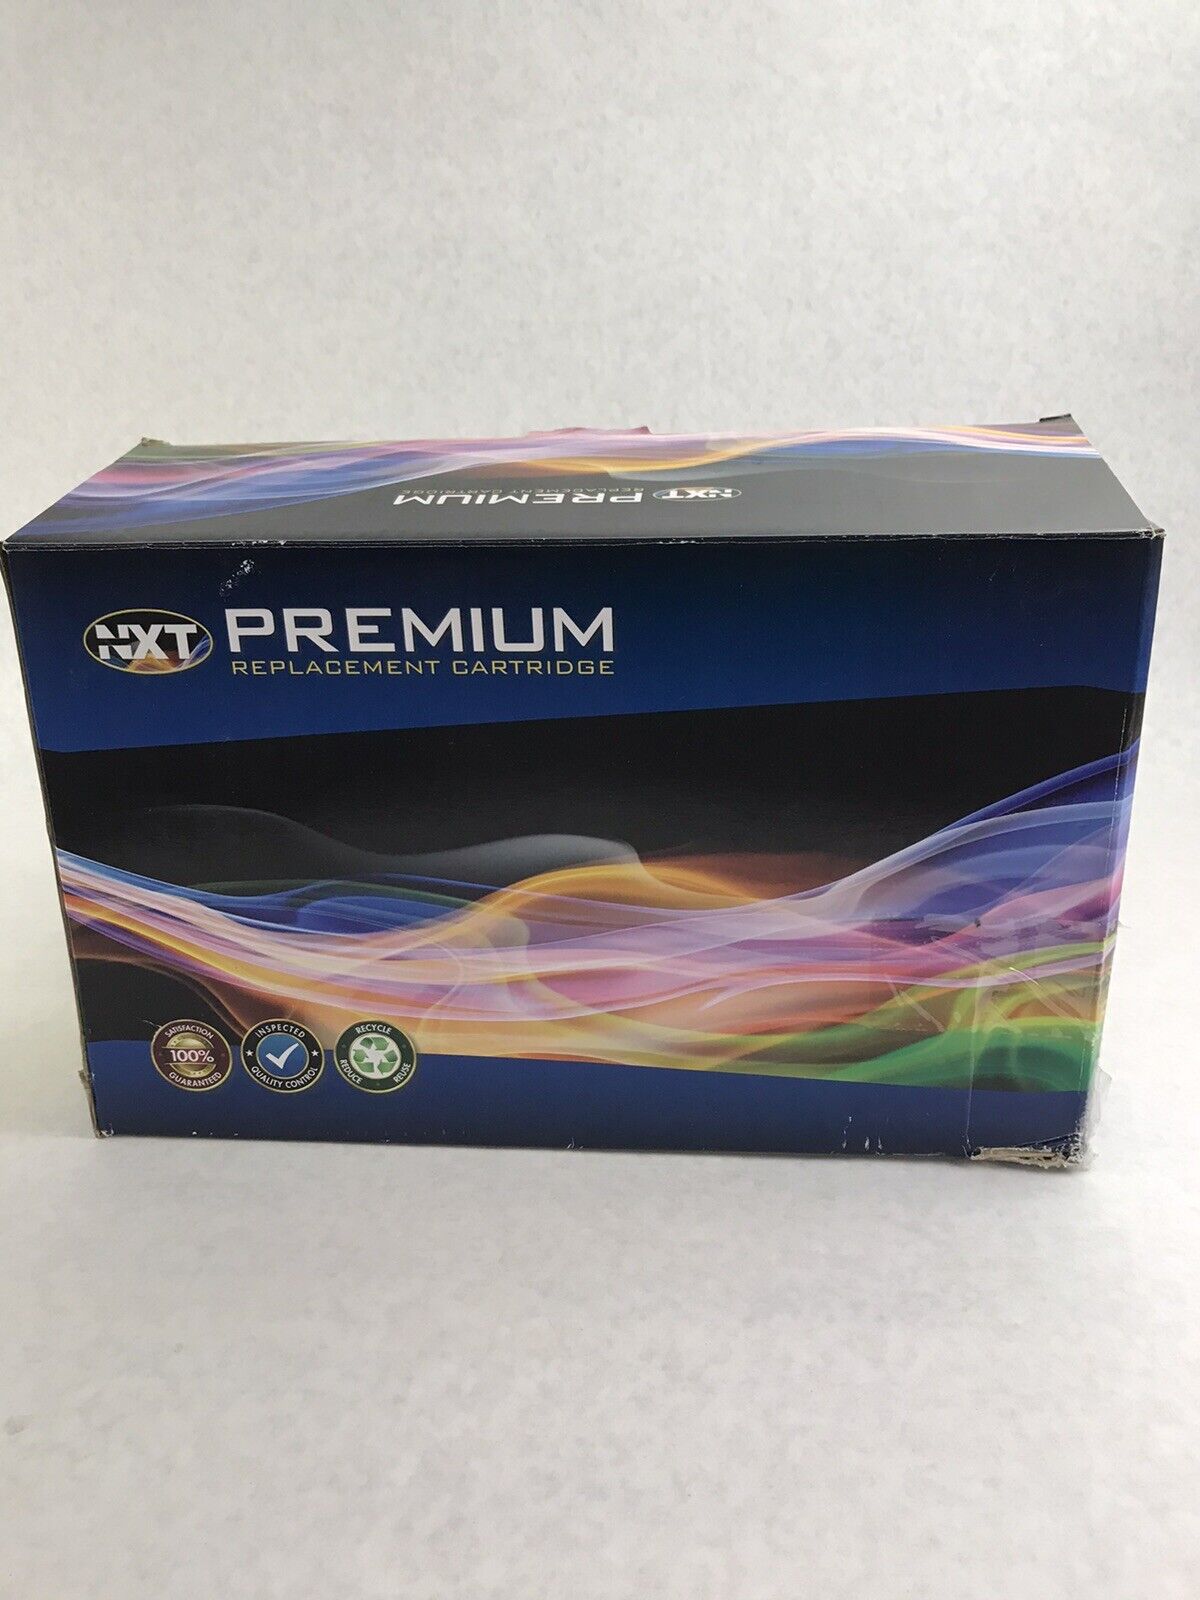 NXT Premium Replacement Cartridge HEWCE252A Yellow + Manual Expired August 2016